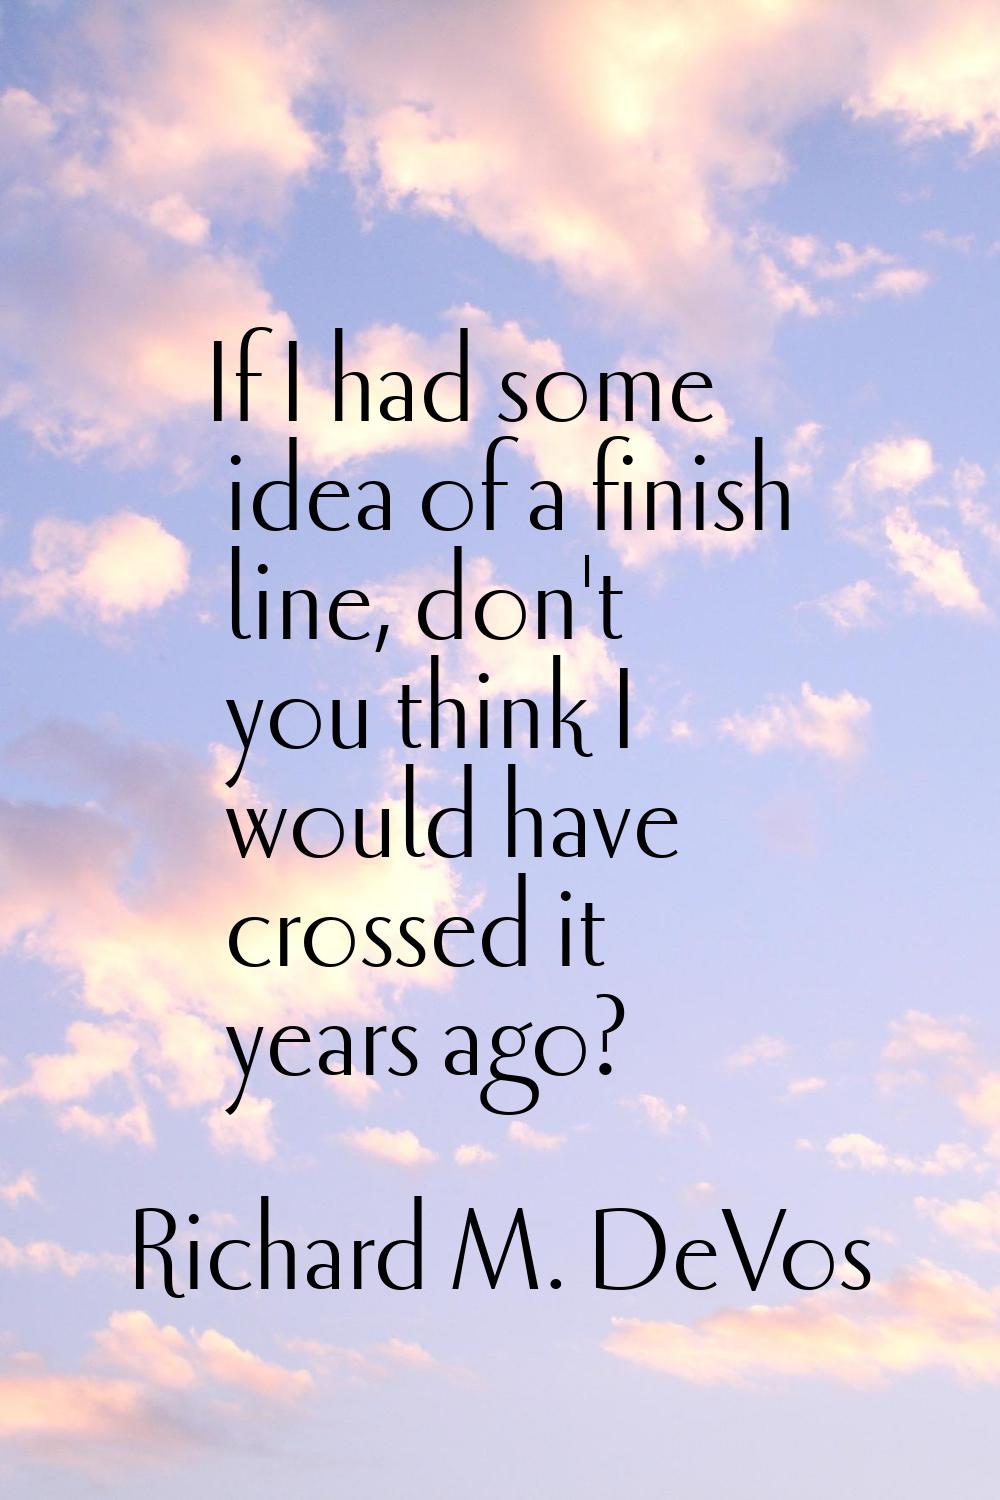 If I had some idea of a finish line, don't you think I would have crossed it years ago?